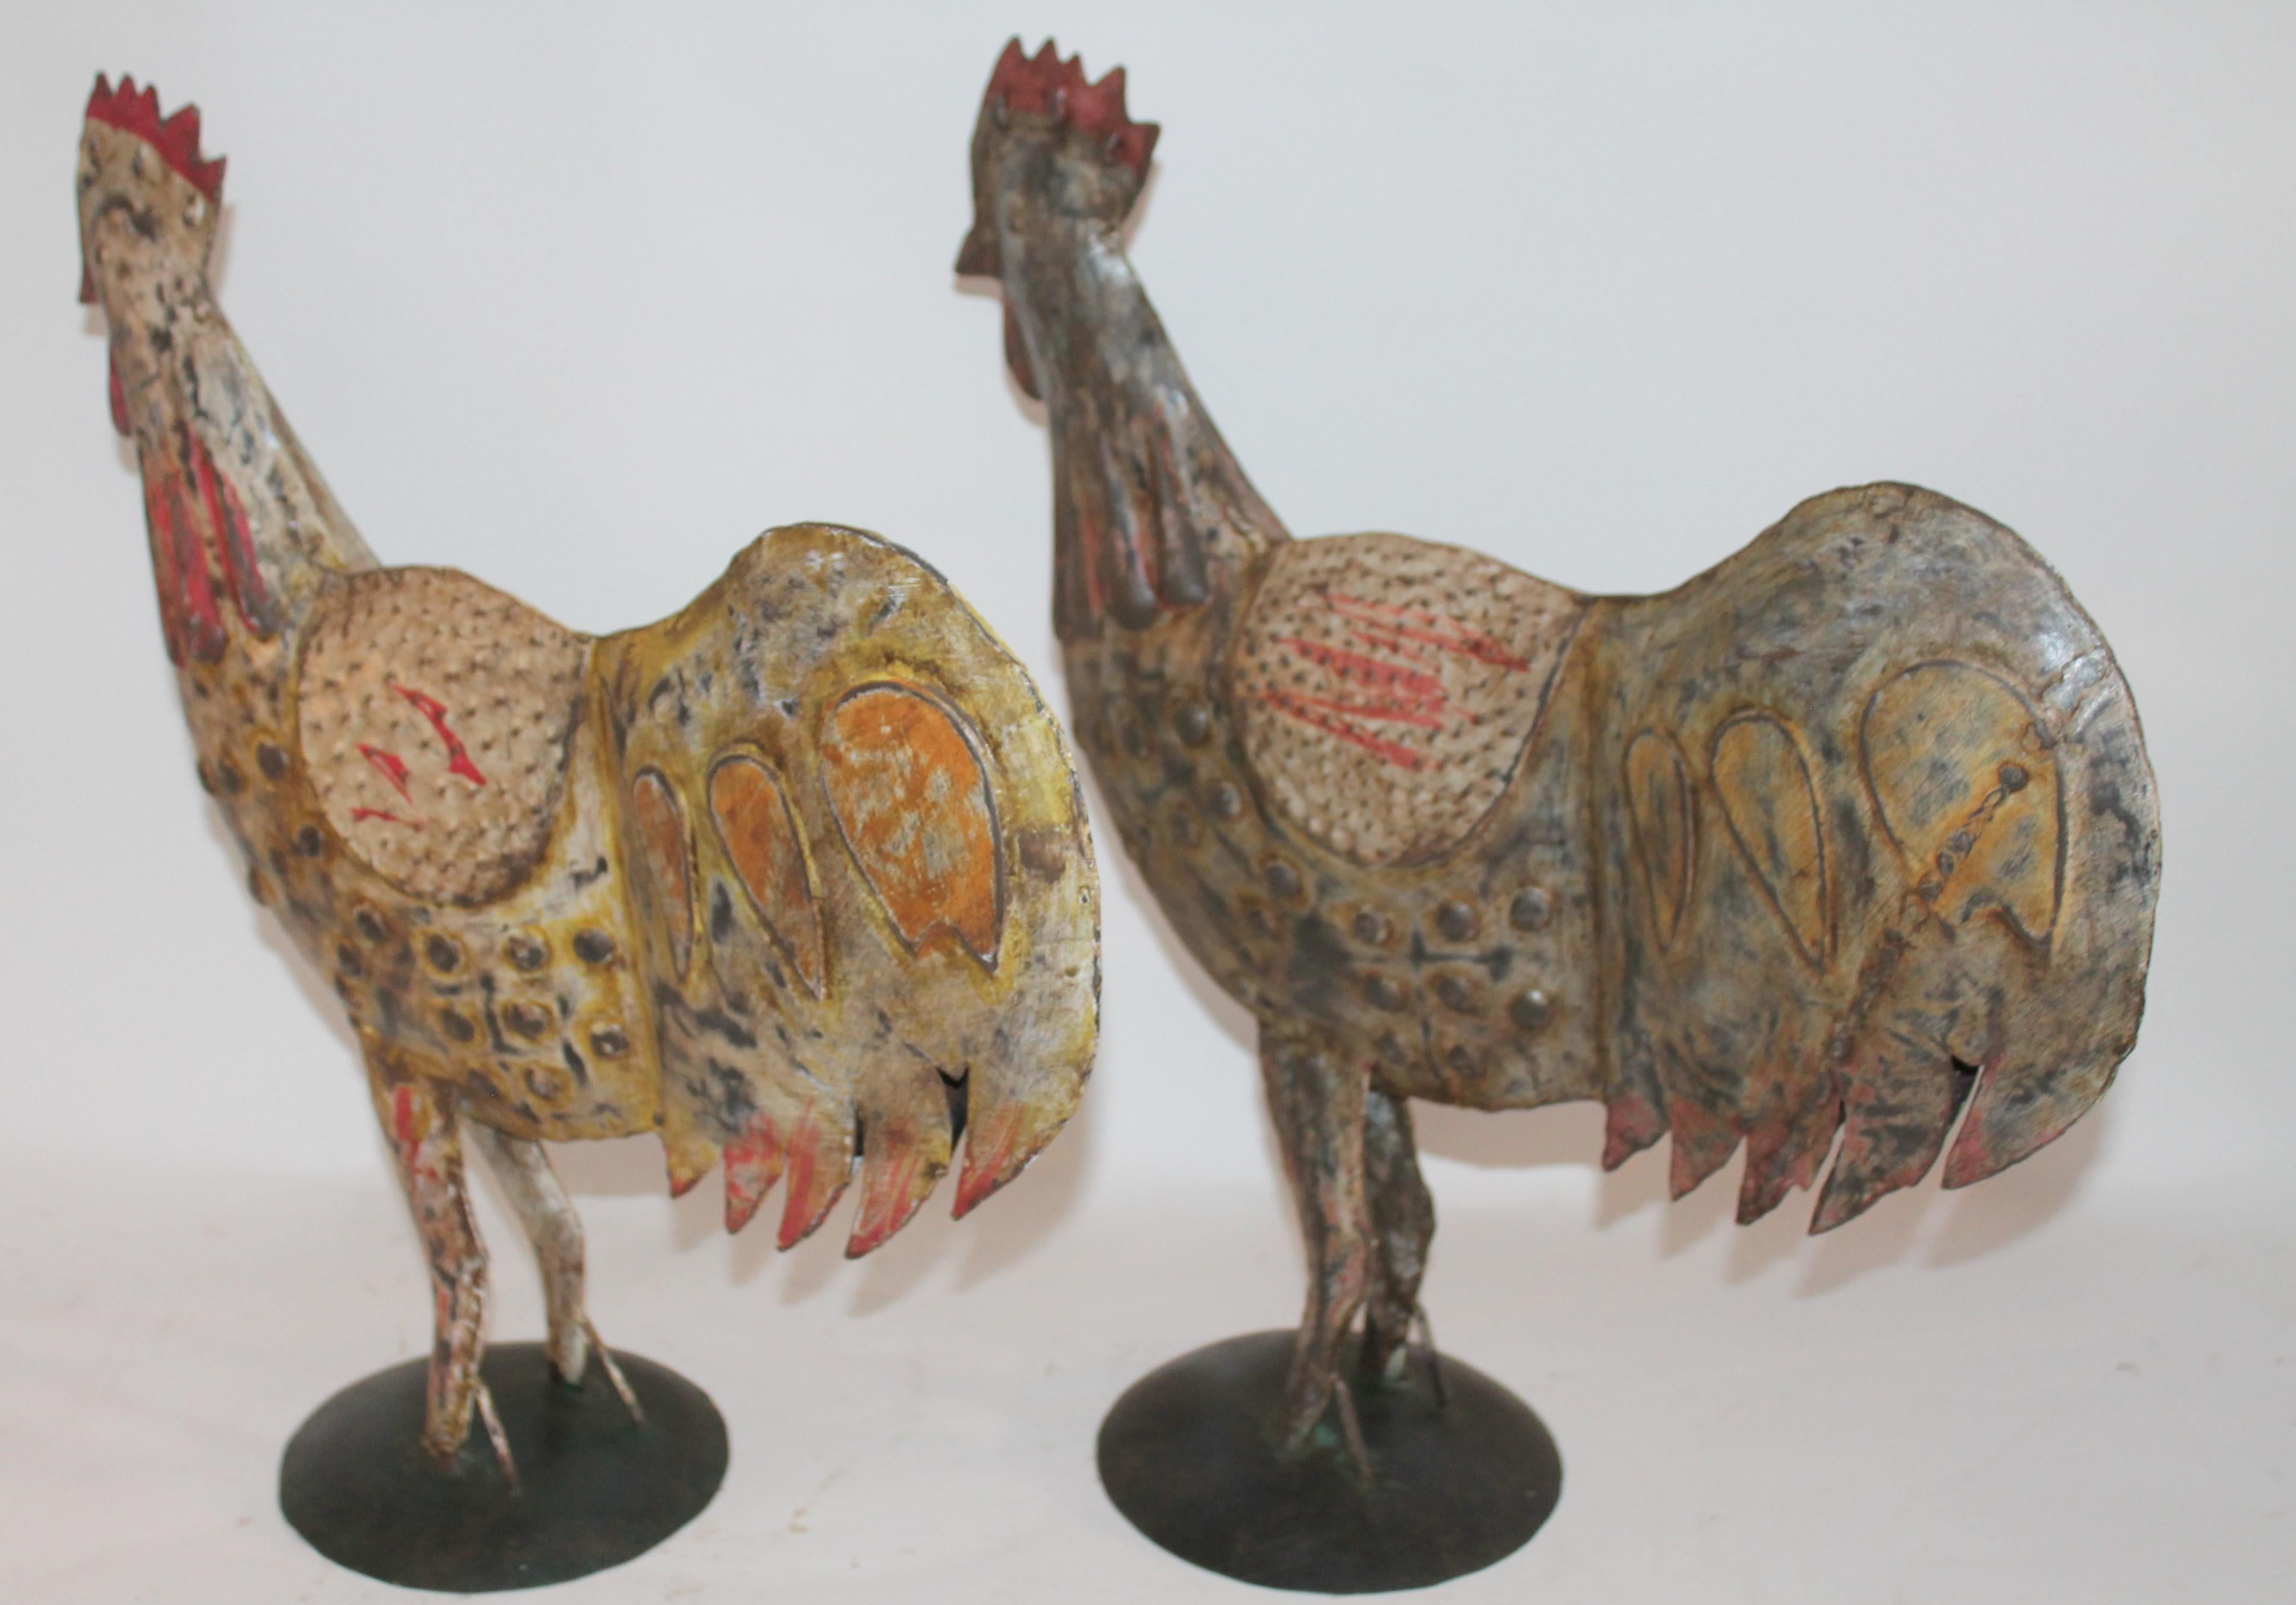 These folky tin painted roosters were originally from Mexico and used in the garden or farm as decorative objects. The painted surfaces are amazing. Sold as a pair.